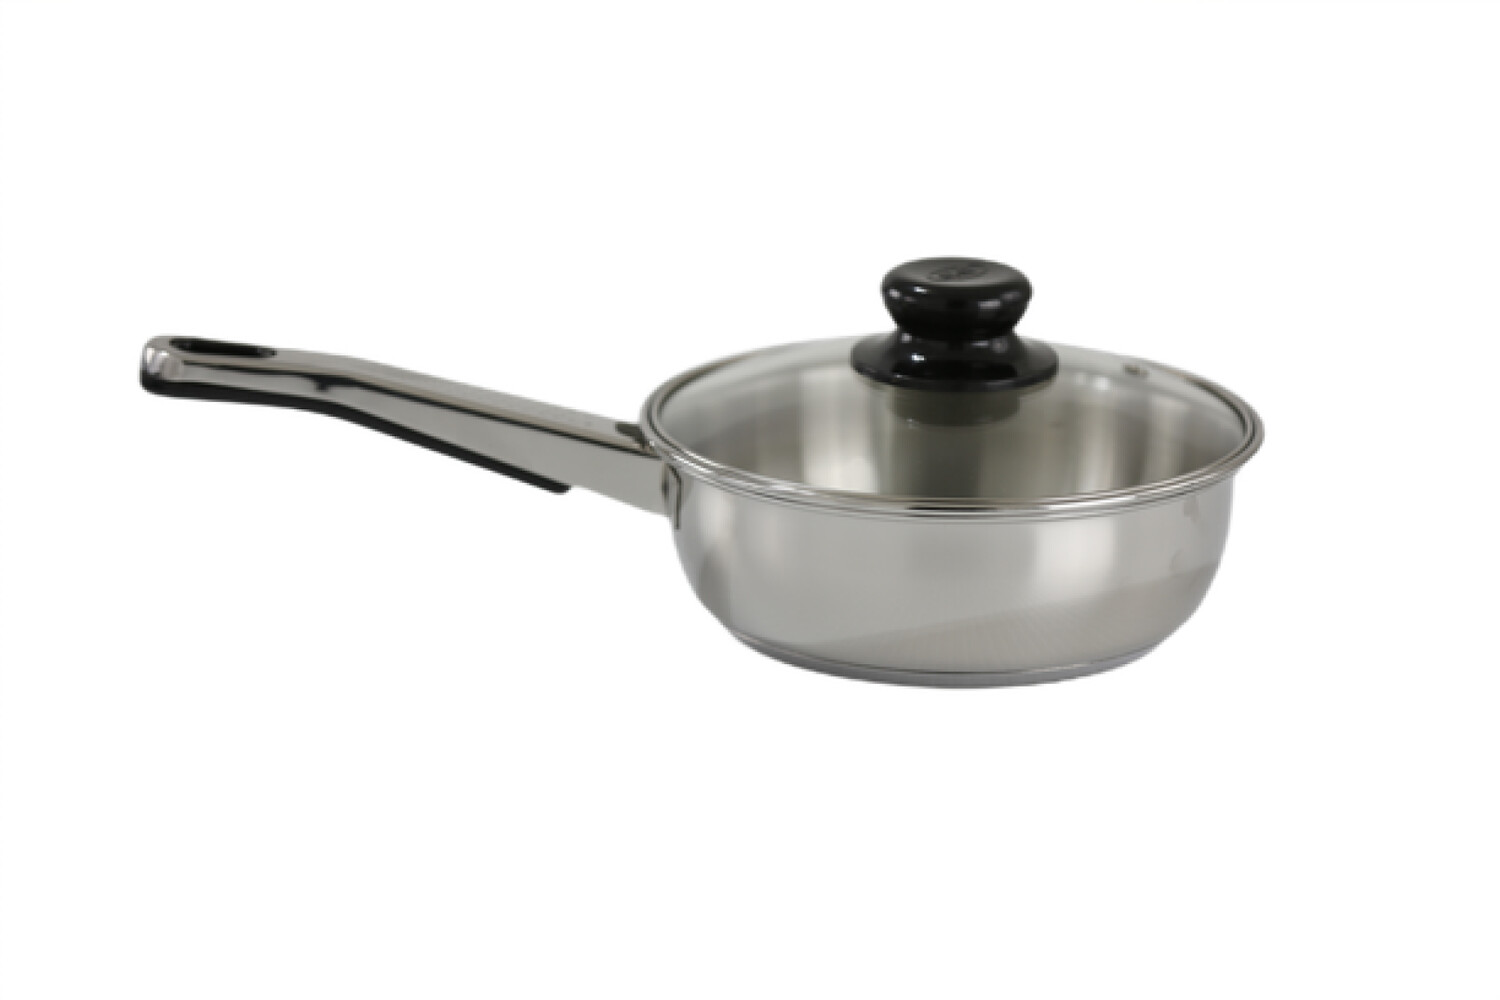 Stainless Steel Sauté Pan / Frying Pan with Glass Lid